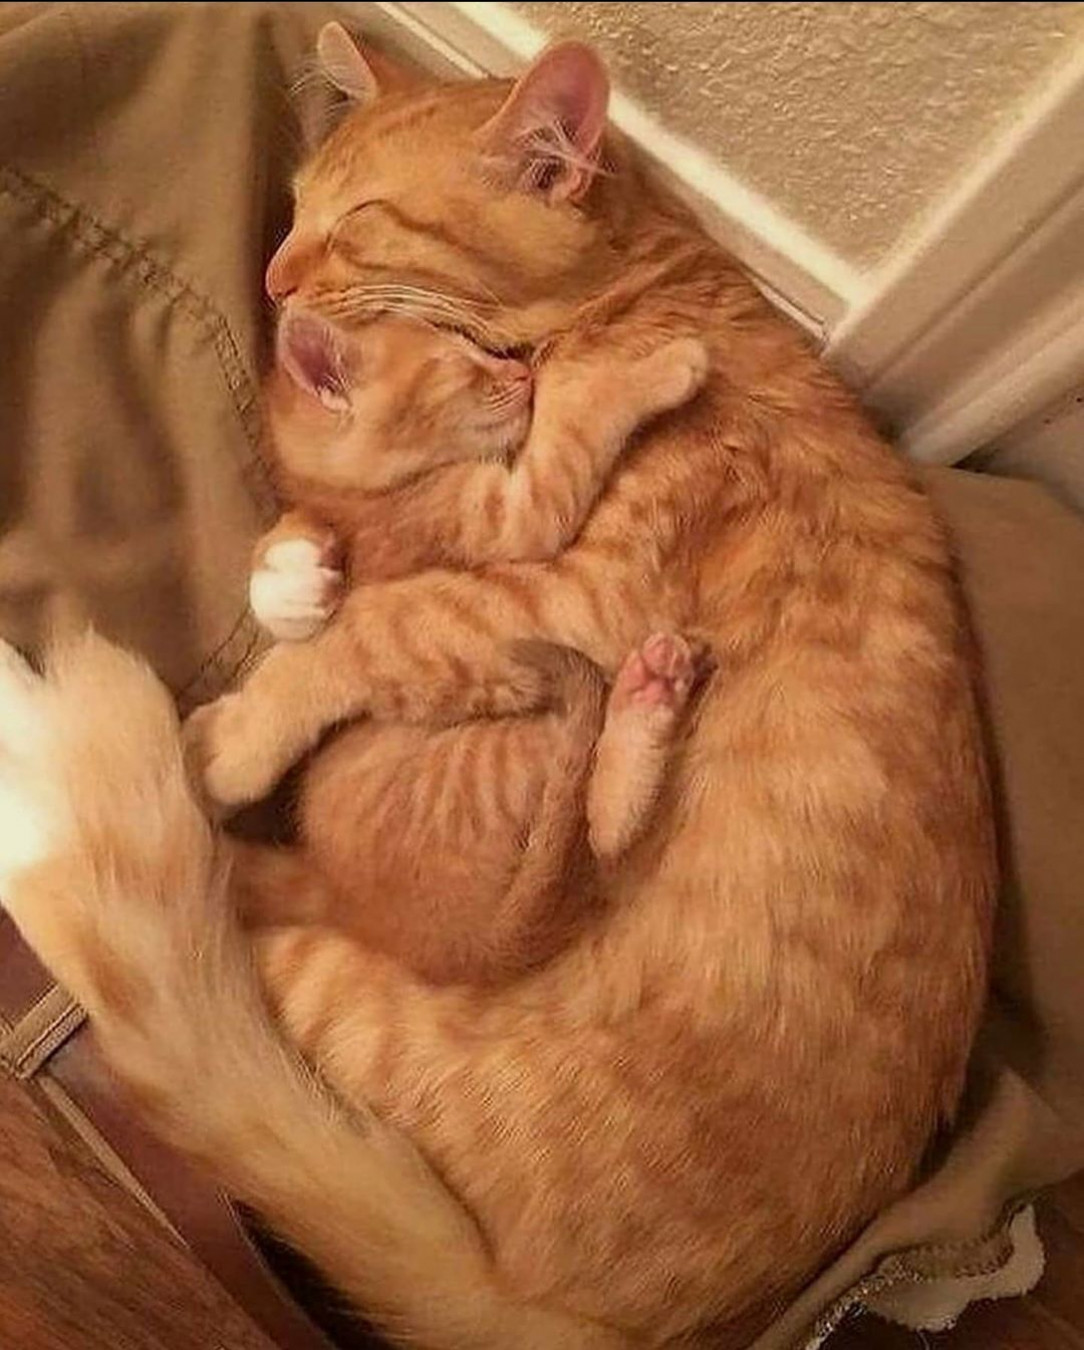 So adorable nothing beats the mother love